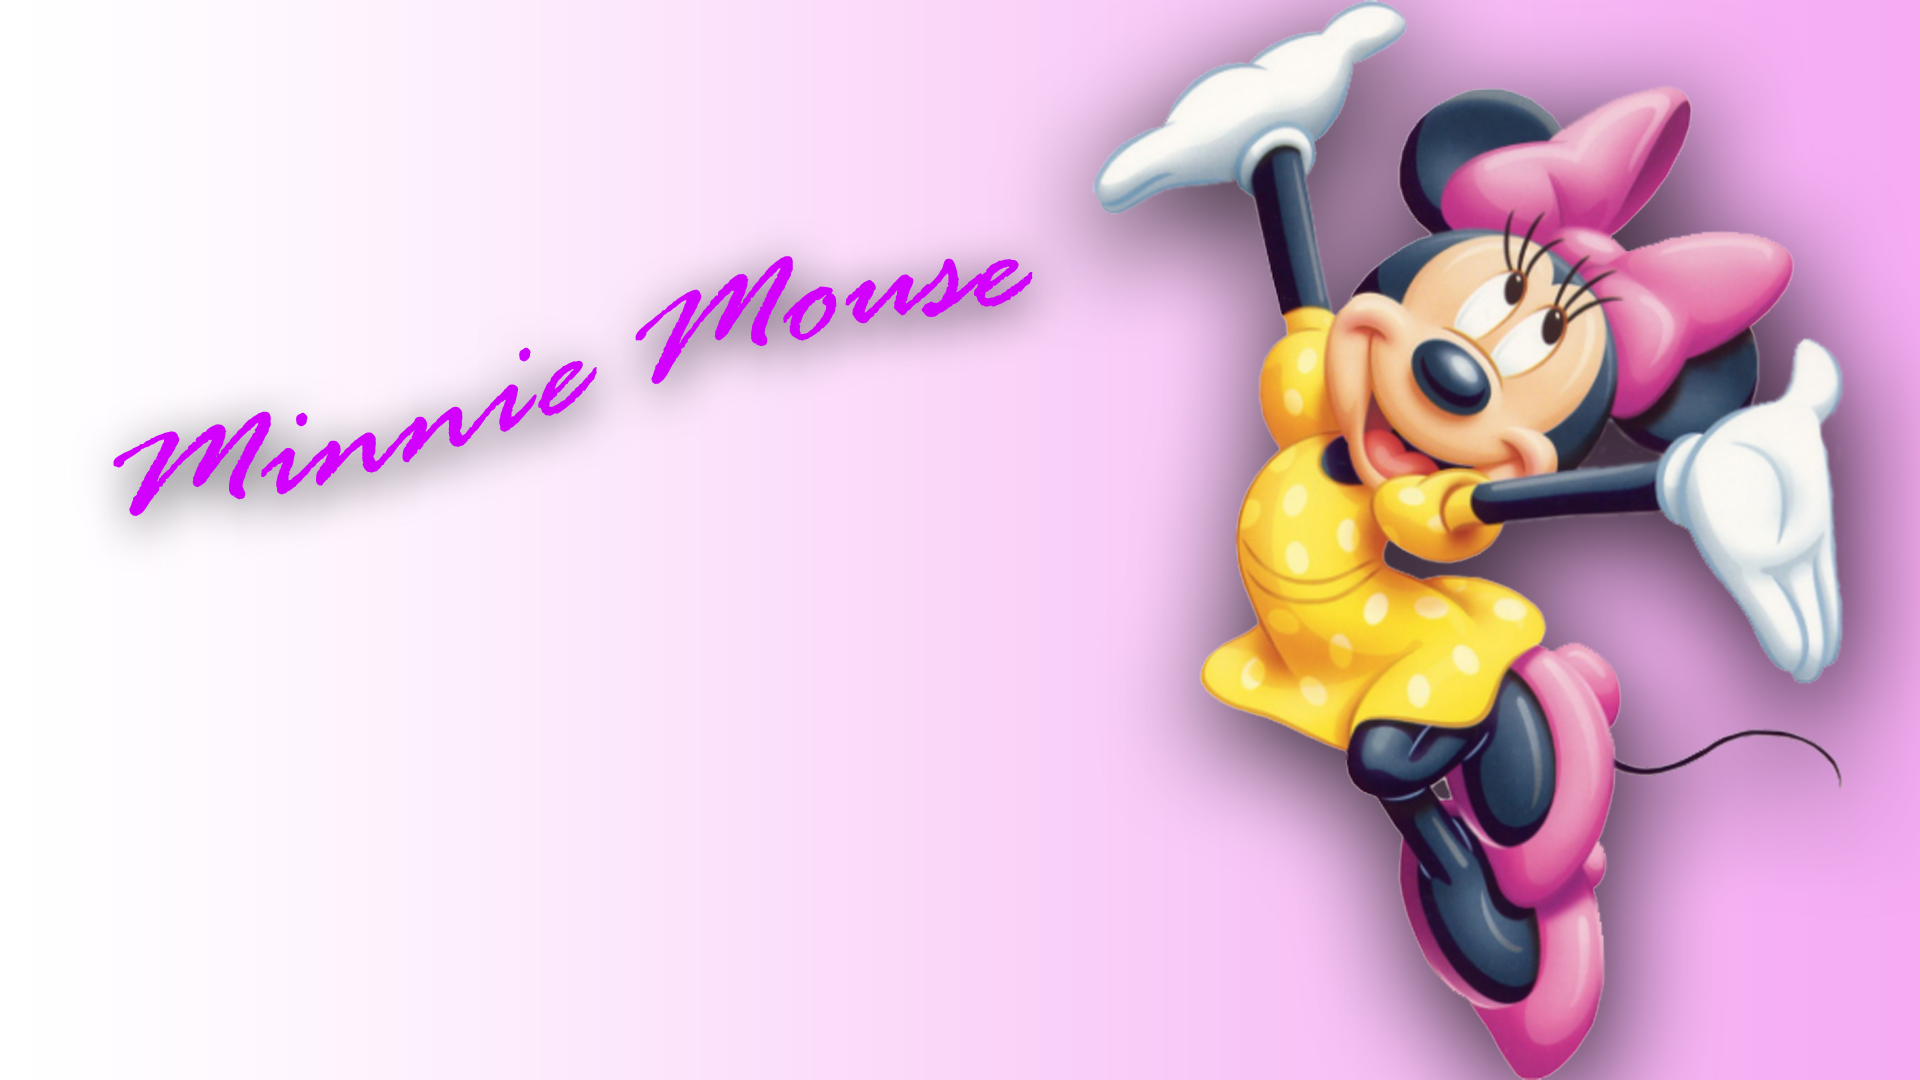  Minnie Mouse Wallpapers Pictures Images